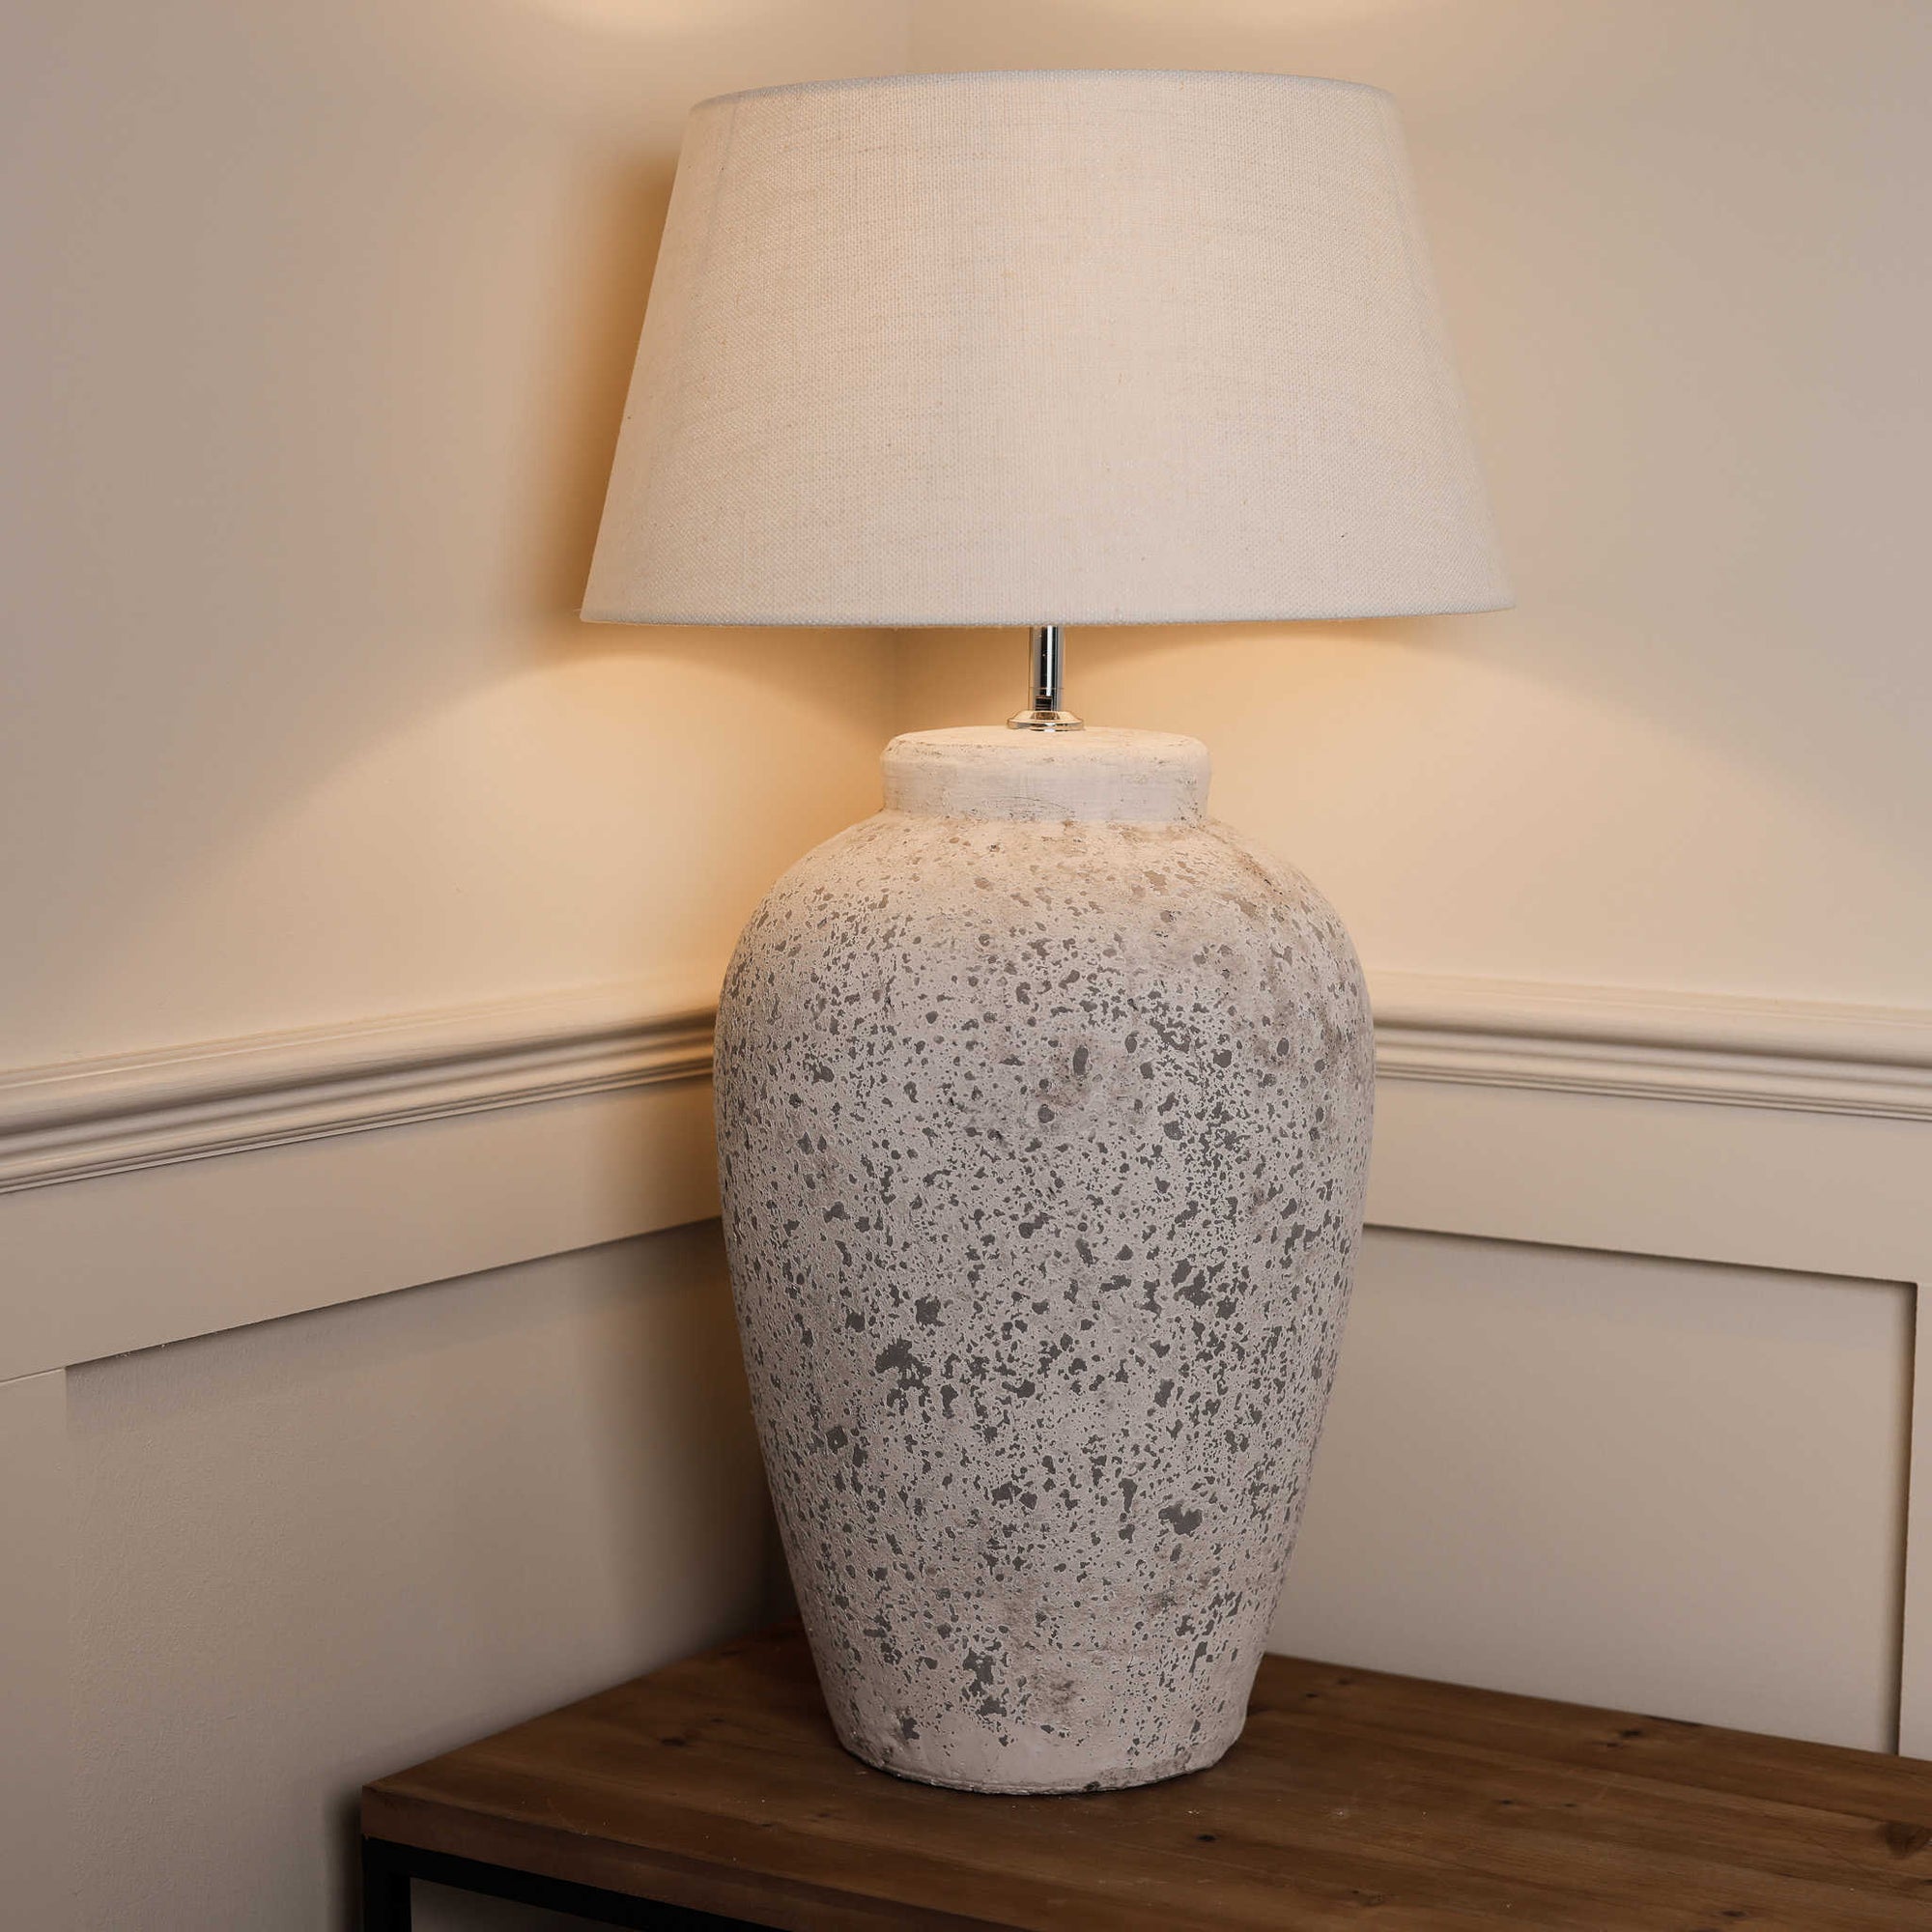 Large tall grey distressed lamp with white lamp shade, on wooden console, switched on.